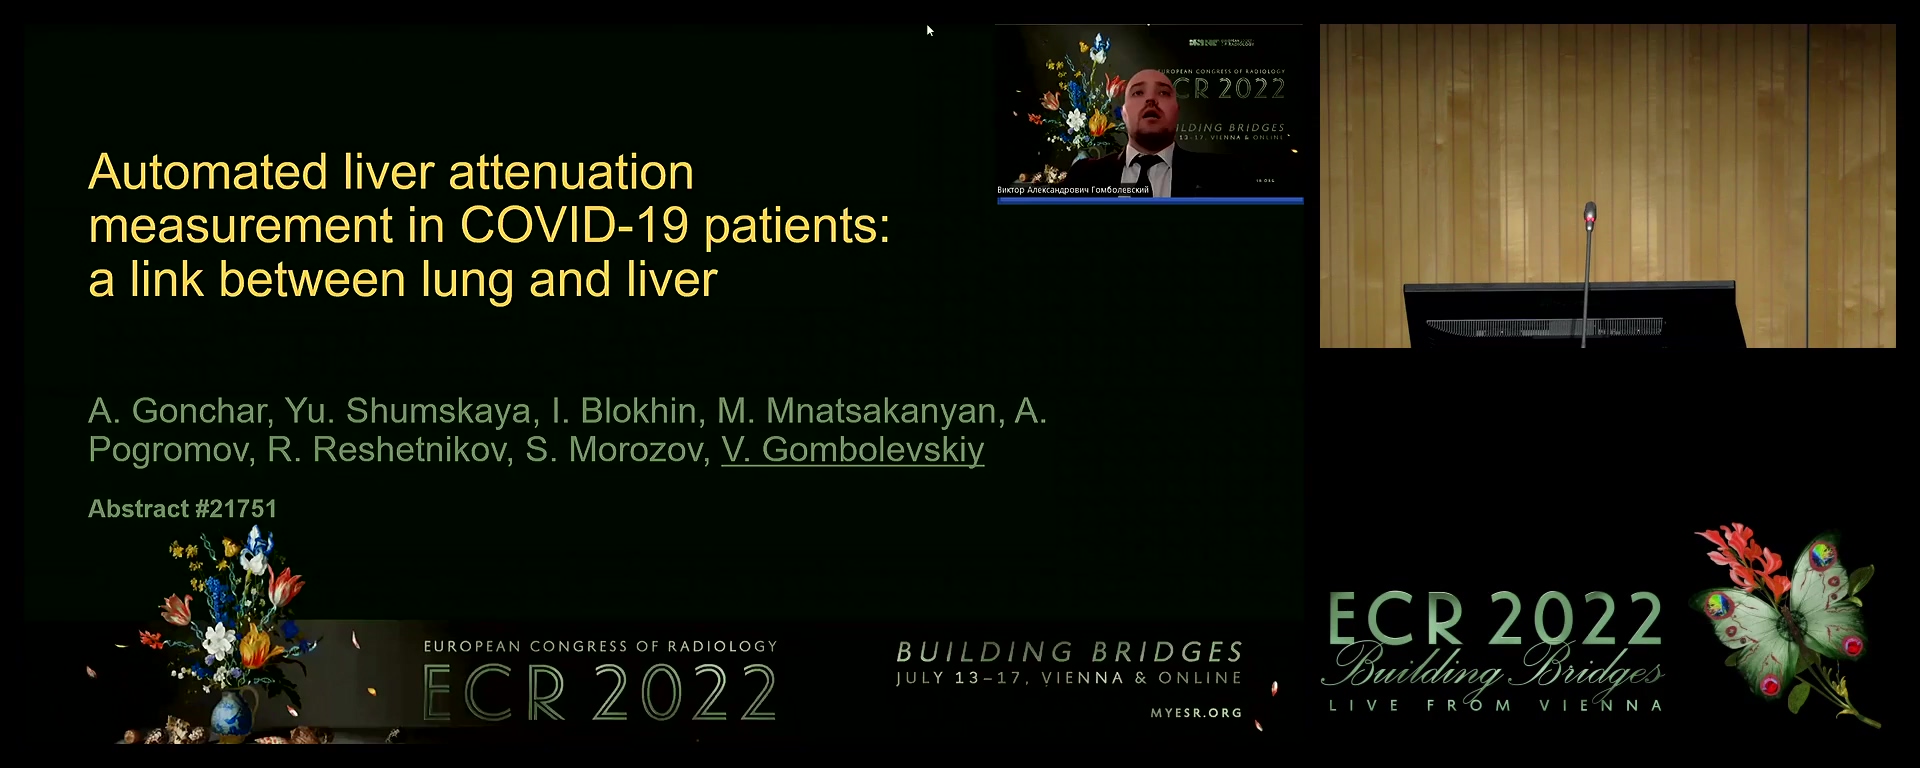 Automated liver attenuation measurement in COVID-19 patients: a link between lung and liver - Victor Gombolevskiy, Moscow / RU